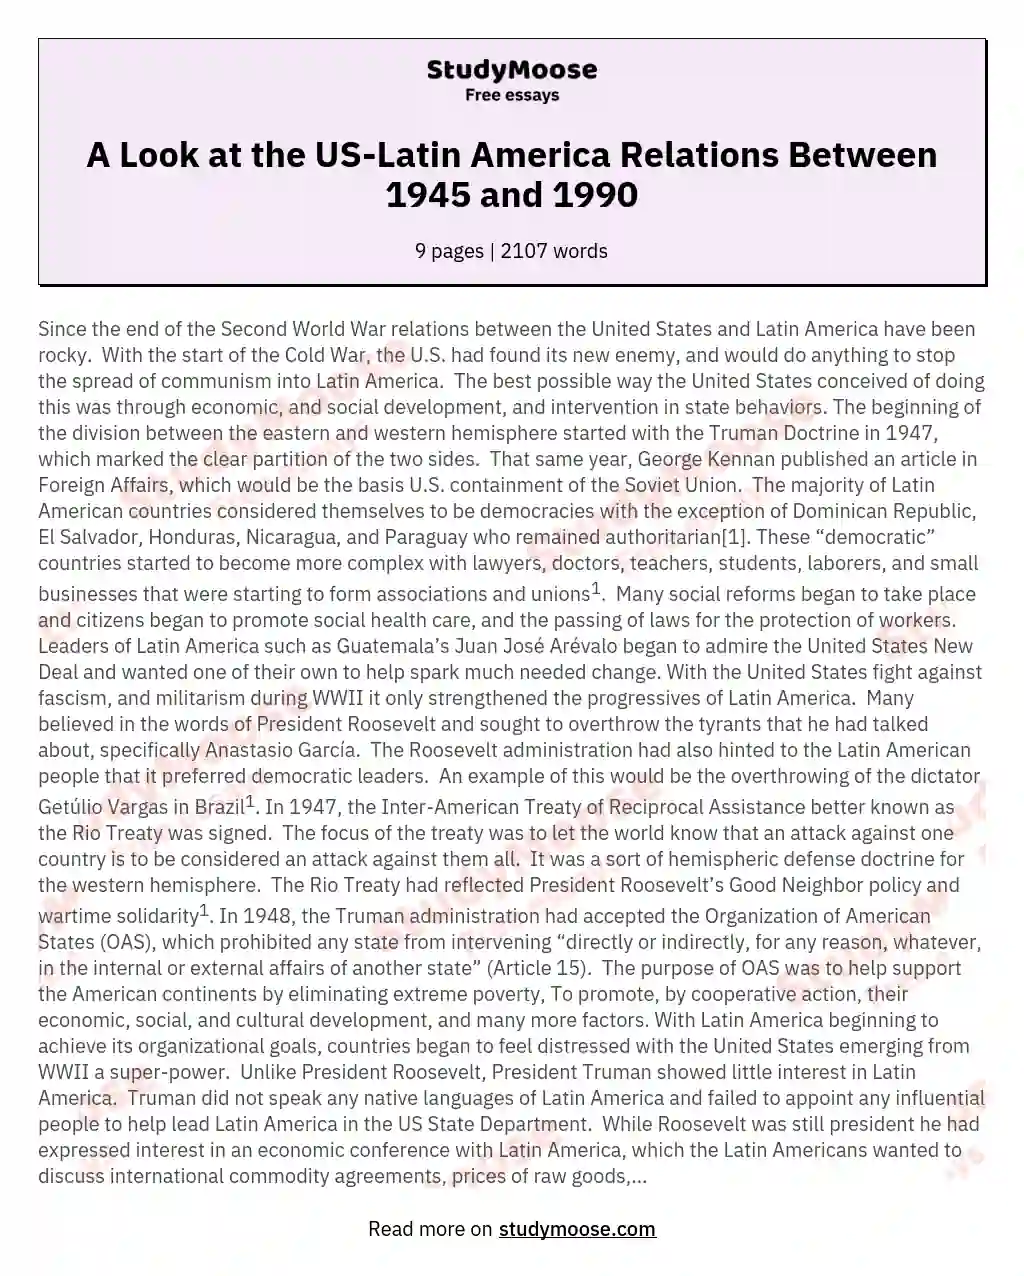 A Look at the US-Latin America Relations Between 1945 and 1990 essay